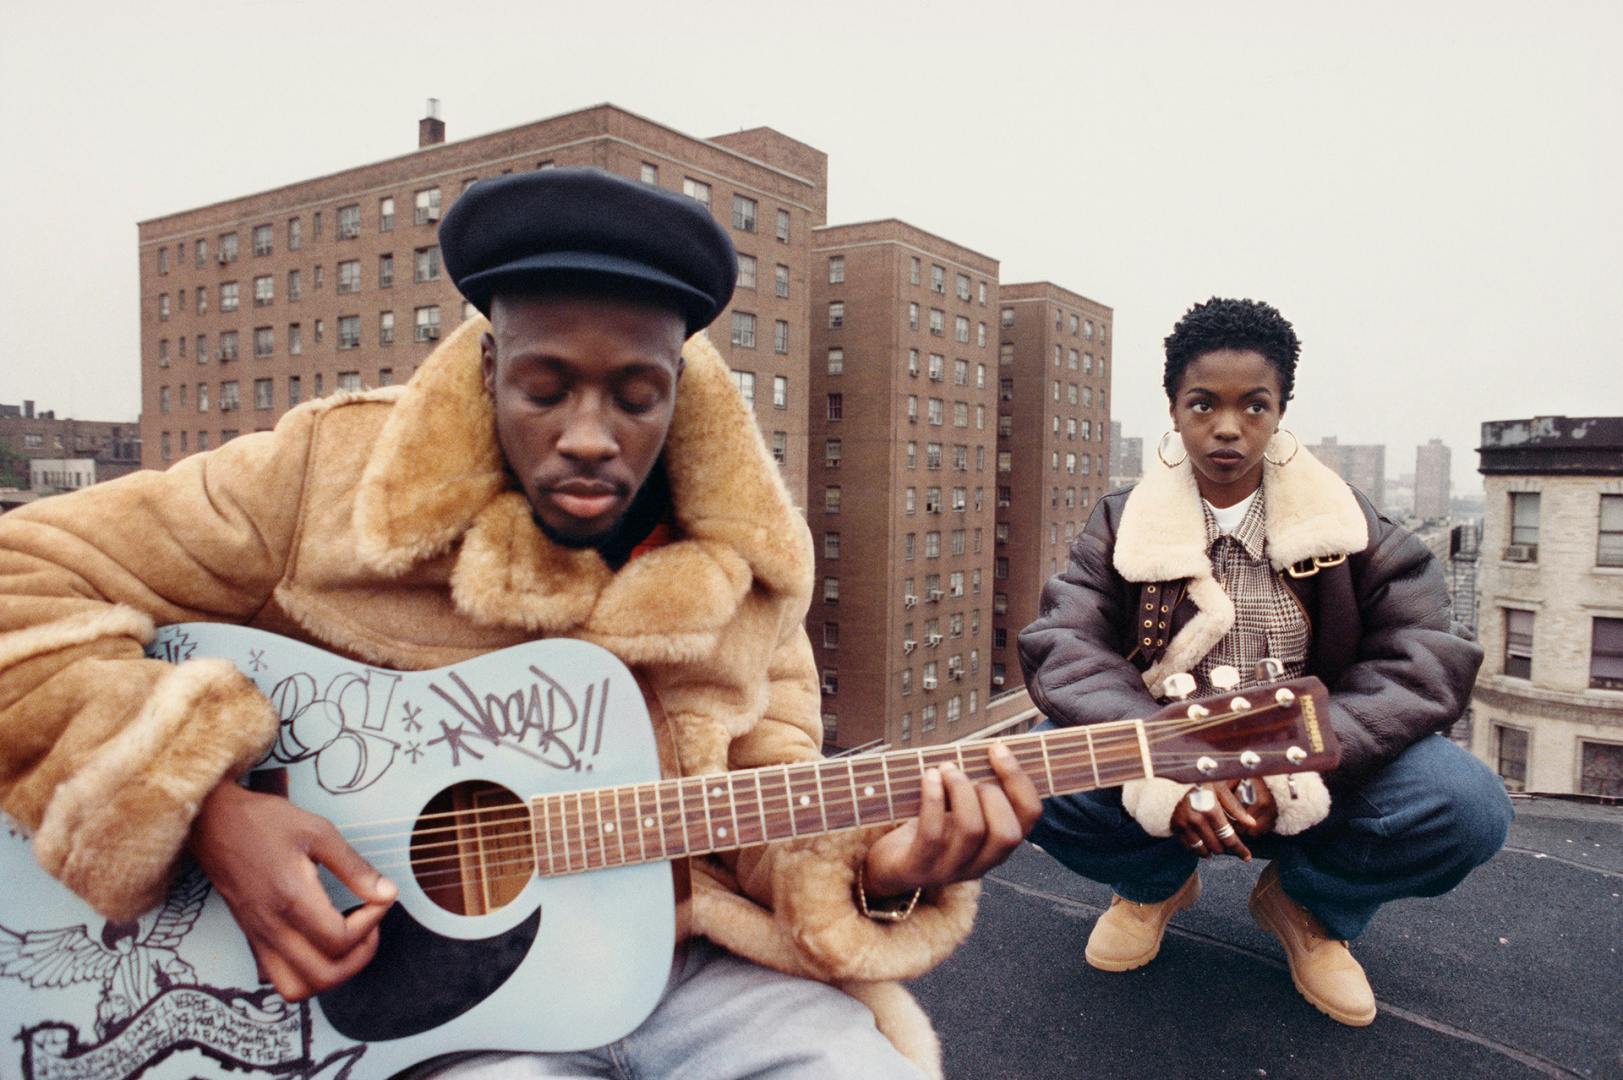 Photograph of Wyclef Jean playing a signed blue acoustic guitar wearing a furry coat and black hat, next to Lauryn Hill wearing an aviator-style jacket. Apartment buildings are in the background